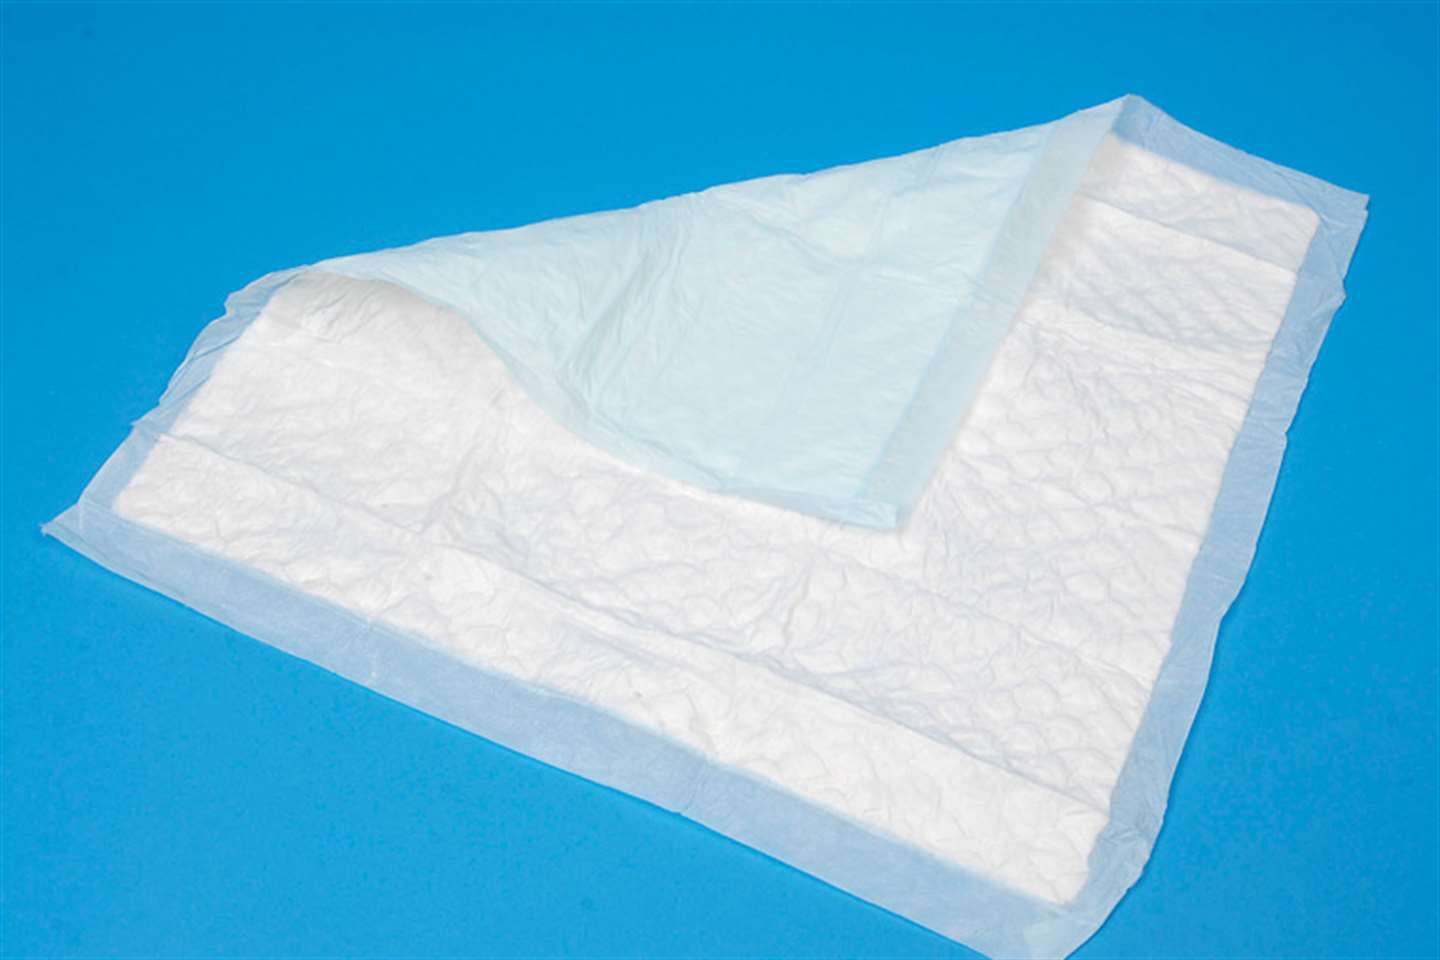 Disposable bed pad